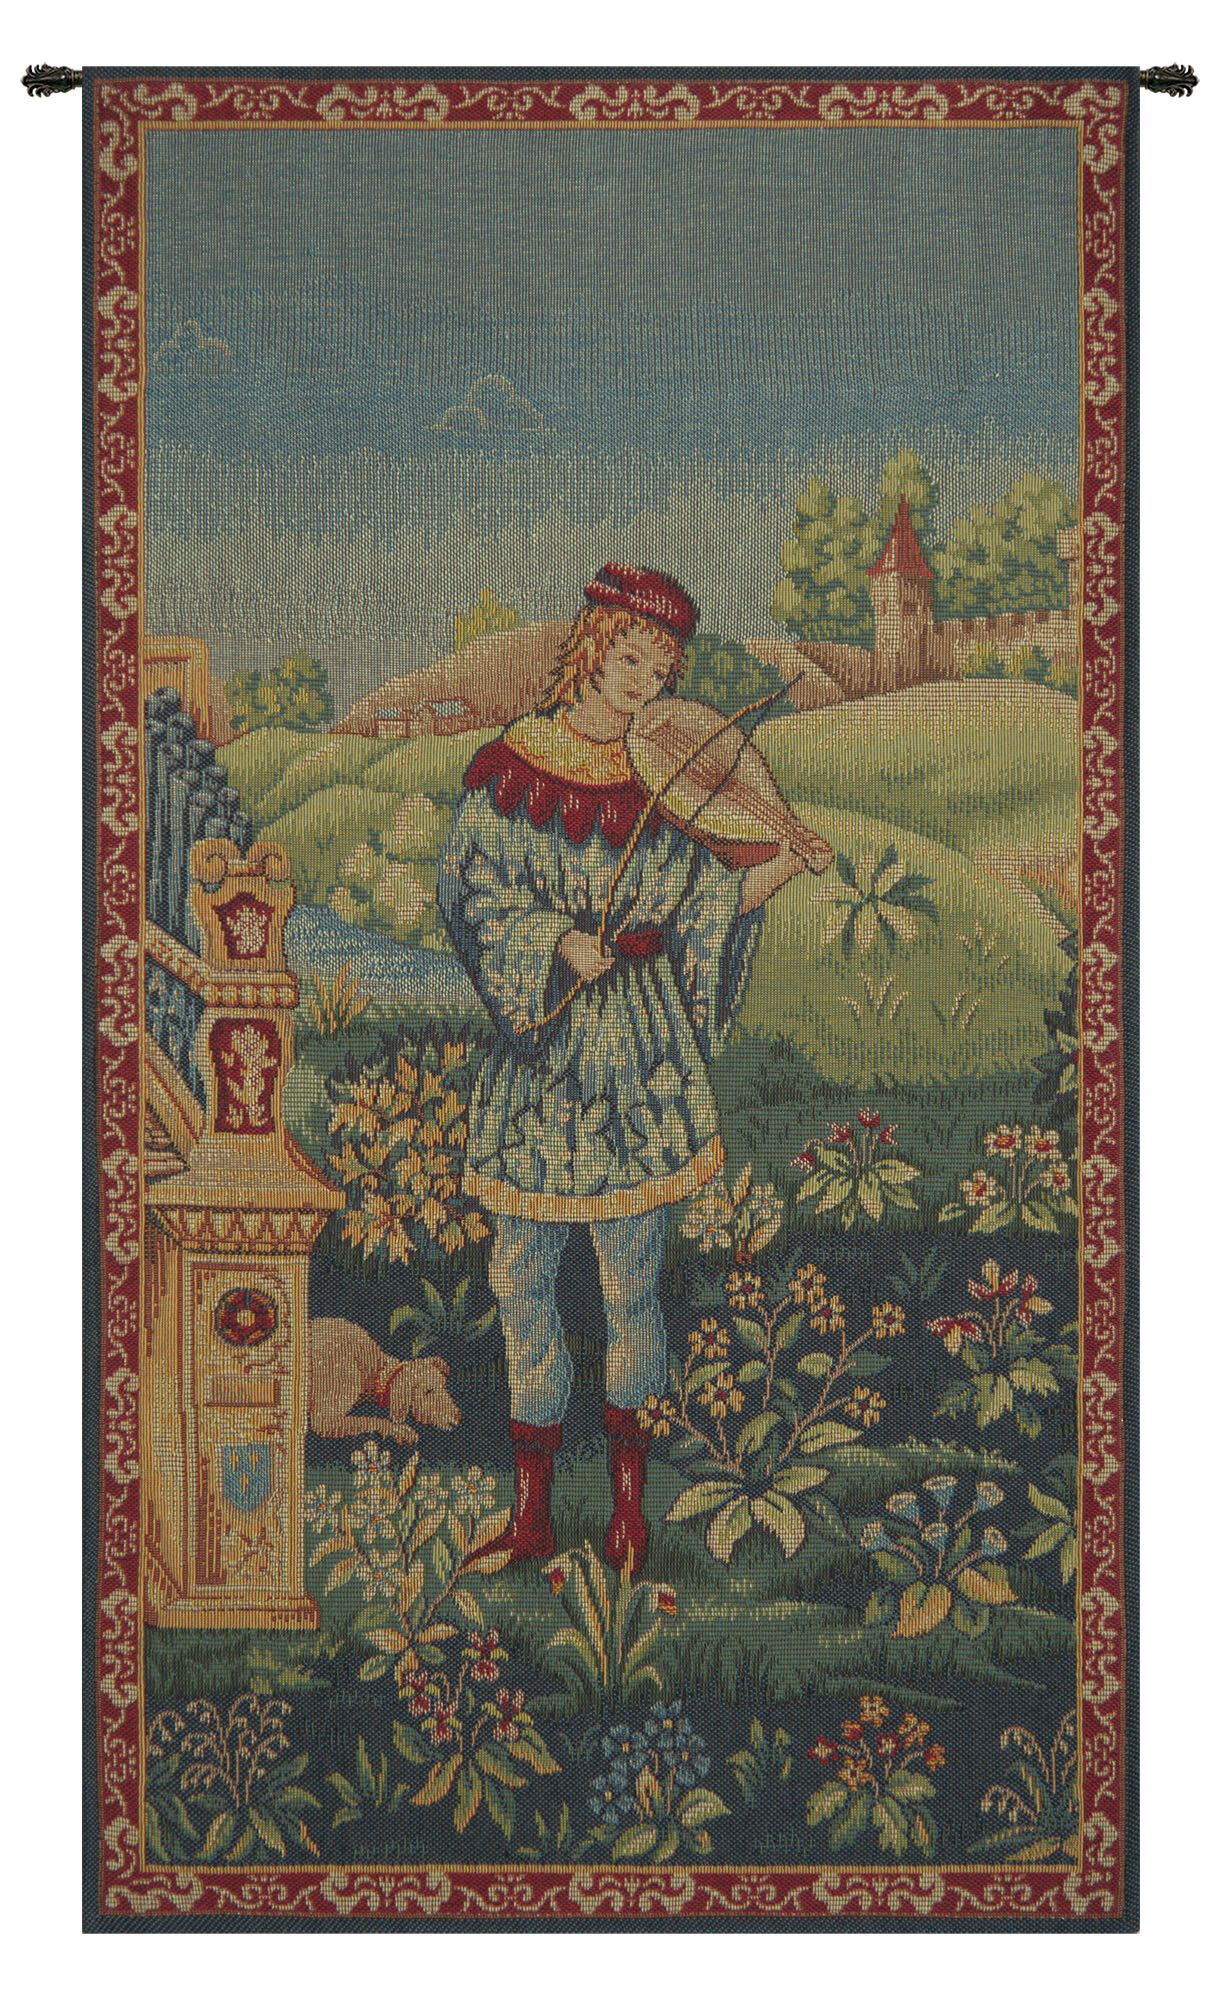 Blended Fabric Le Troubadour Tapestry Throughout Most Recently Released Blended Fabric In His Tapestries And Wall Hangings (View 6 of 20)